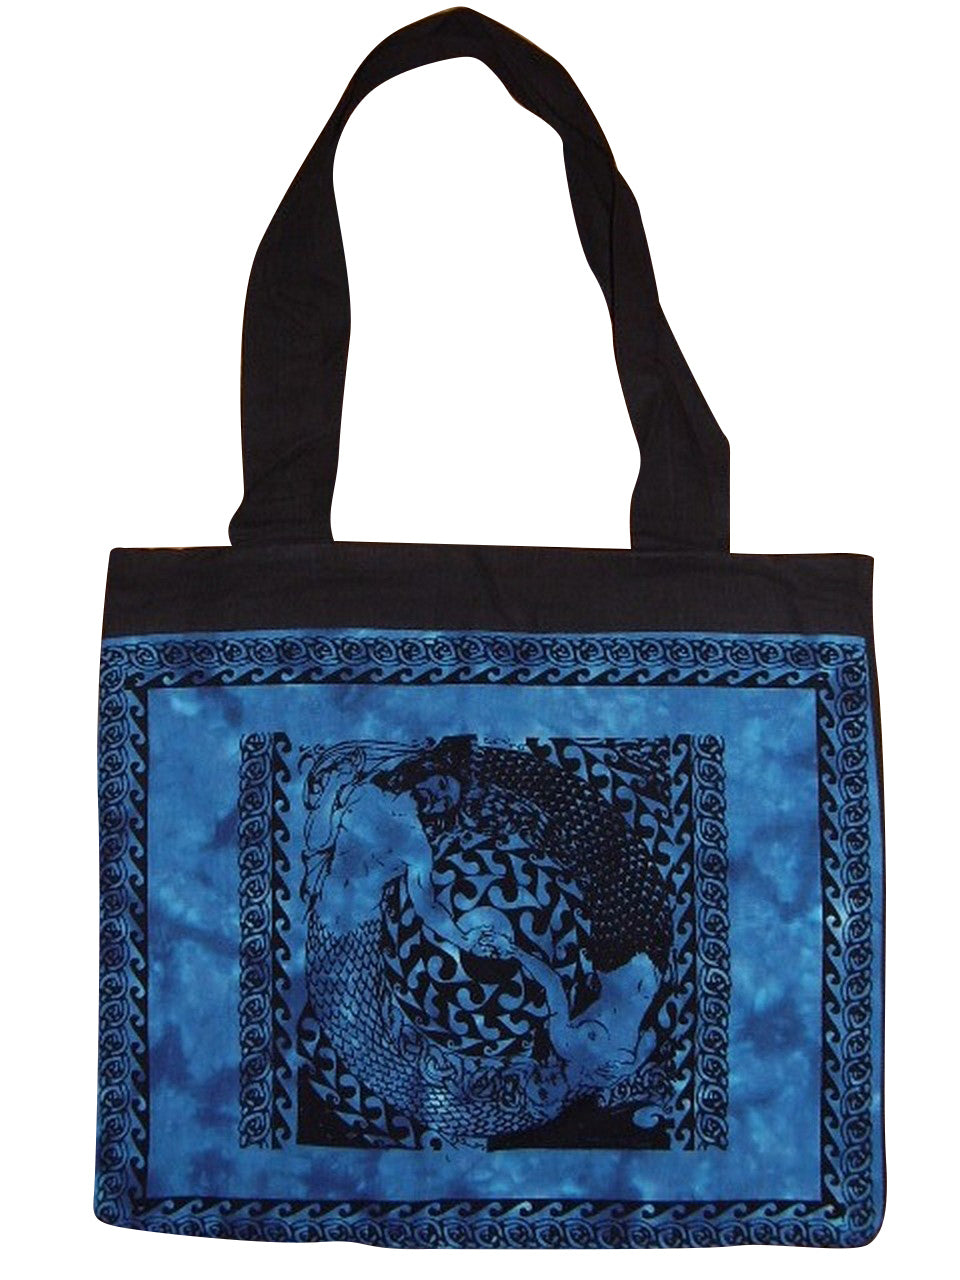 Lined Cotton Celtic Tote Bag Tender Waves 15 x 17 